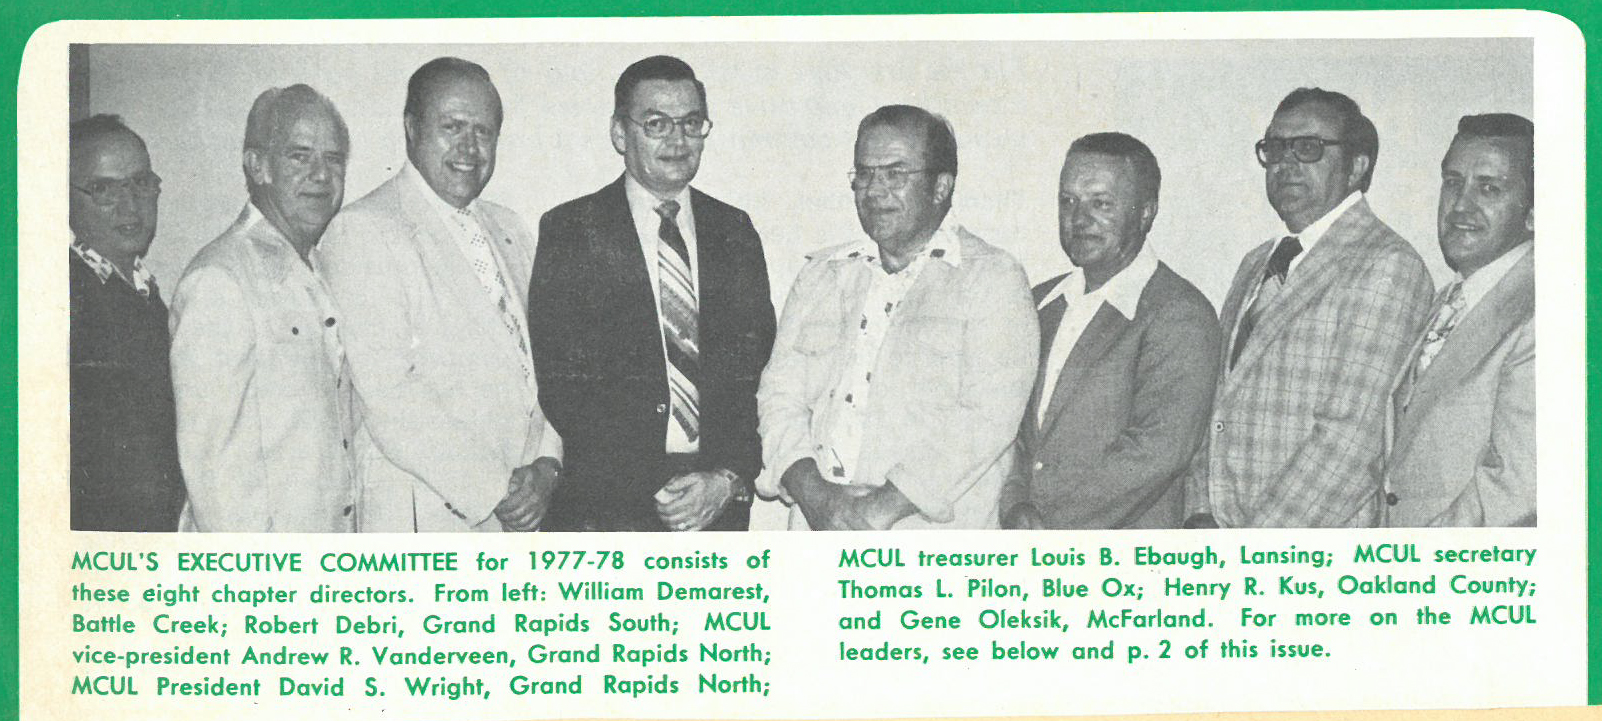 Michigan Credit Union League's Executive Committee 1977-78 (second from left, Robert J. Debri).